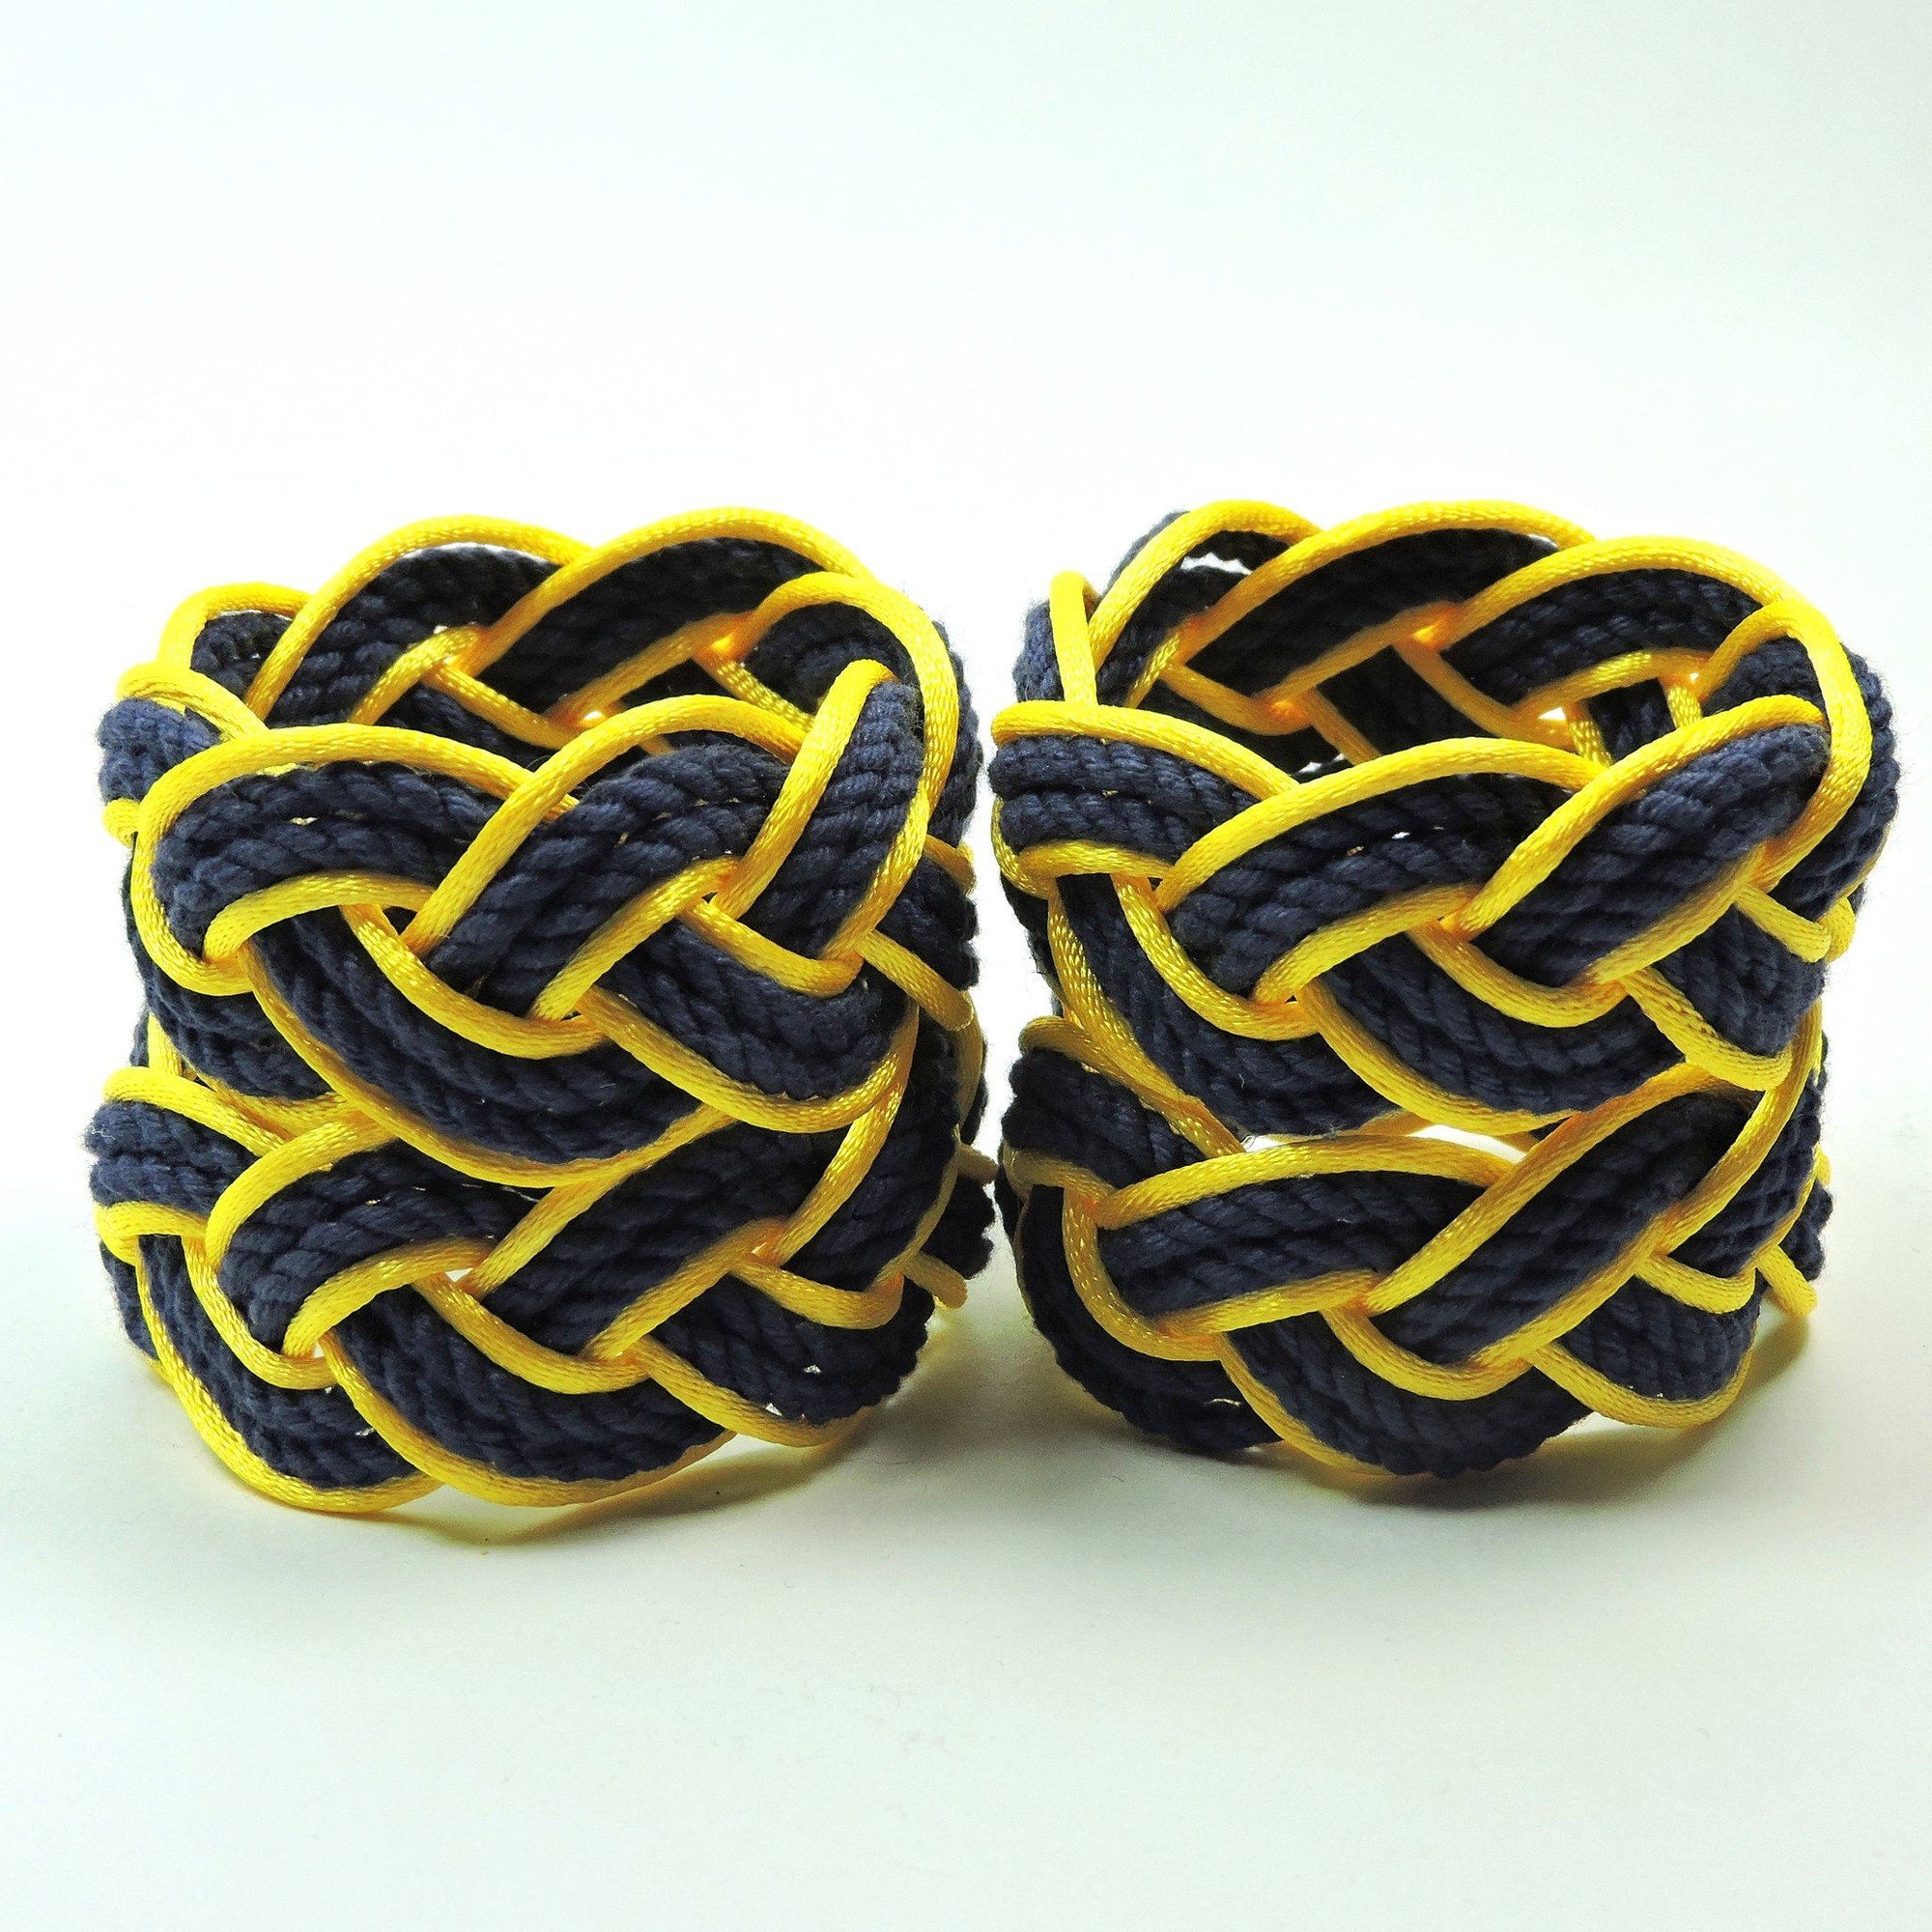 Nautical Knot Sailor Knot Napkin Rings, Navy Outlined in Yellow Satin, Set of 4 - Limited Edition! handmade at Mystic Knotwork